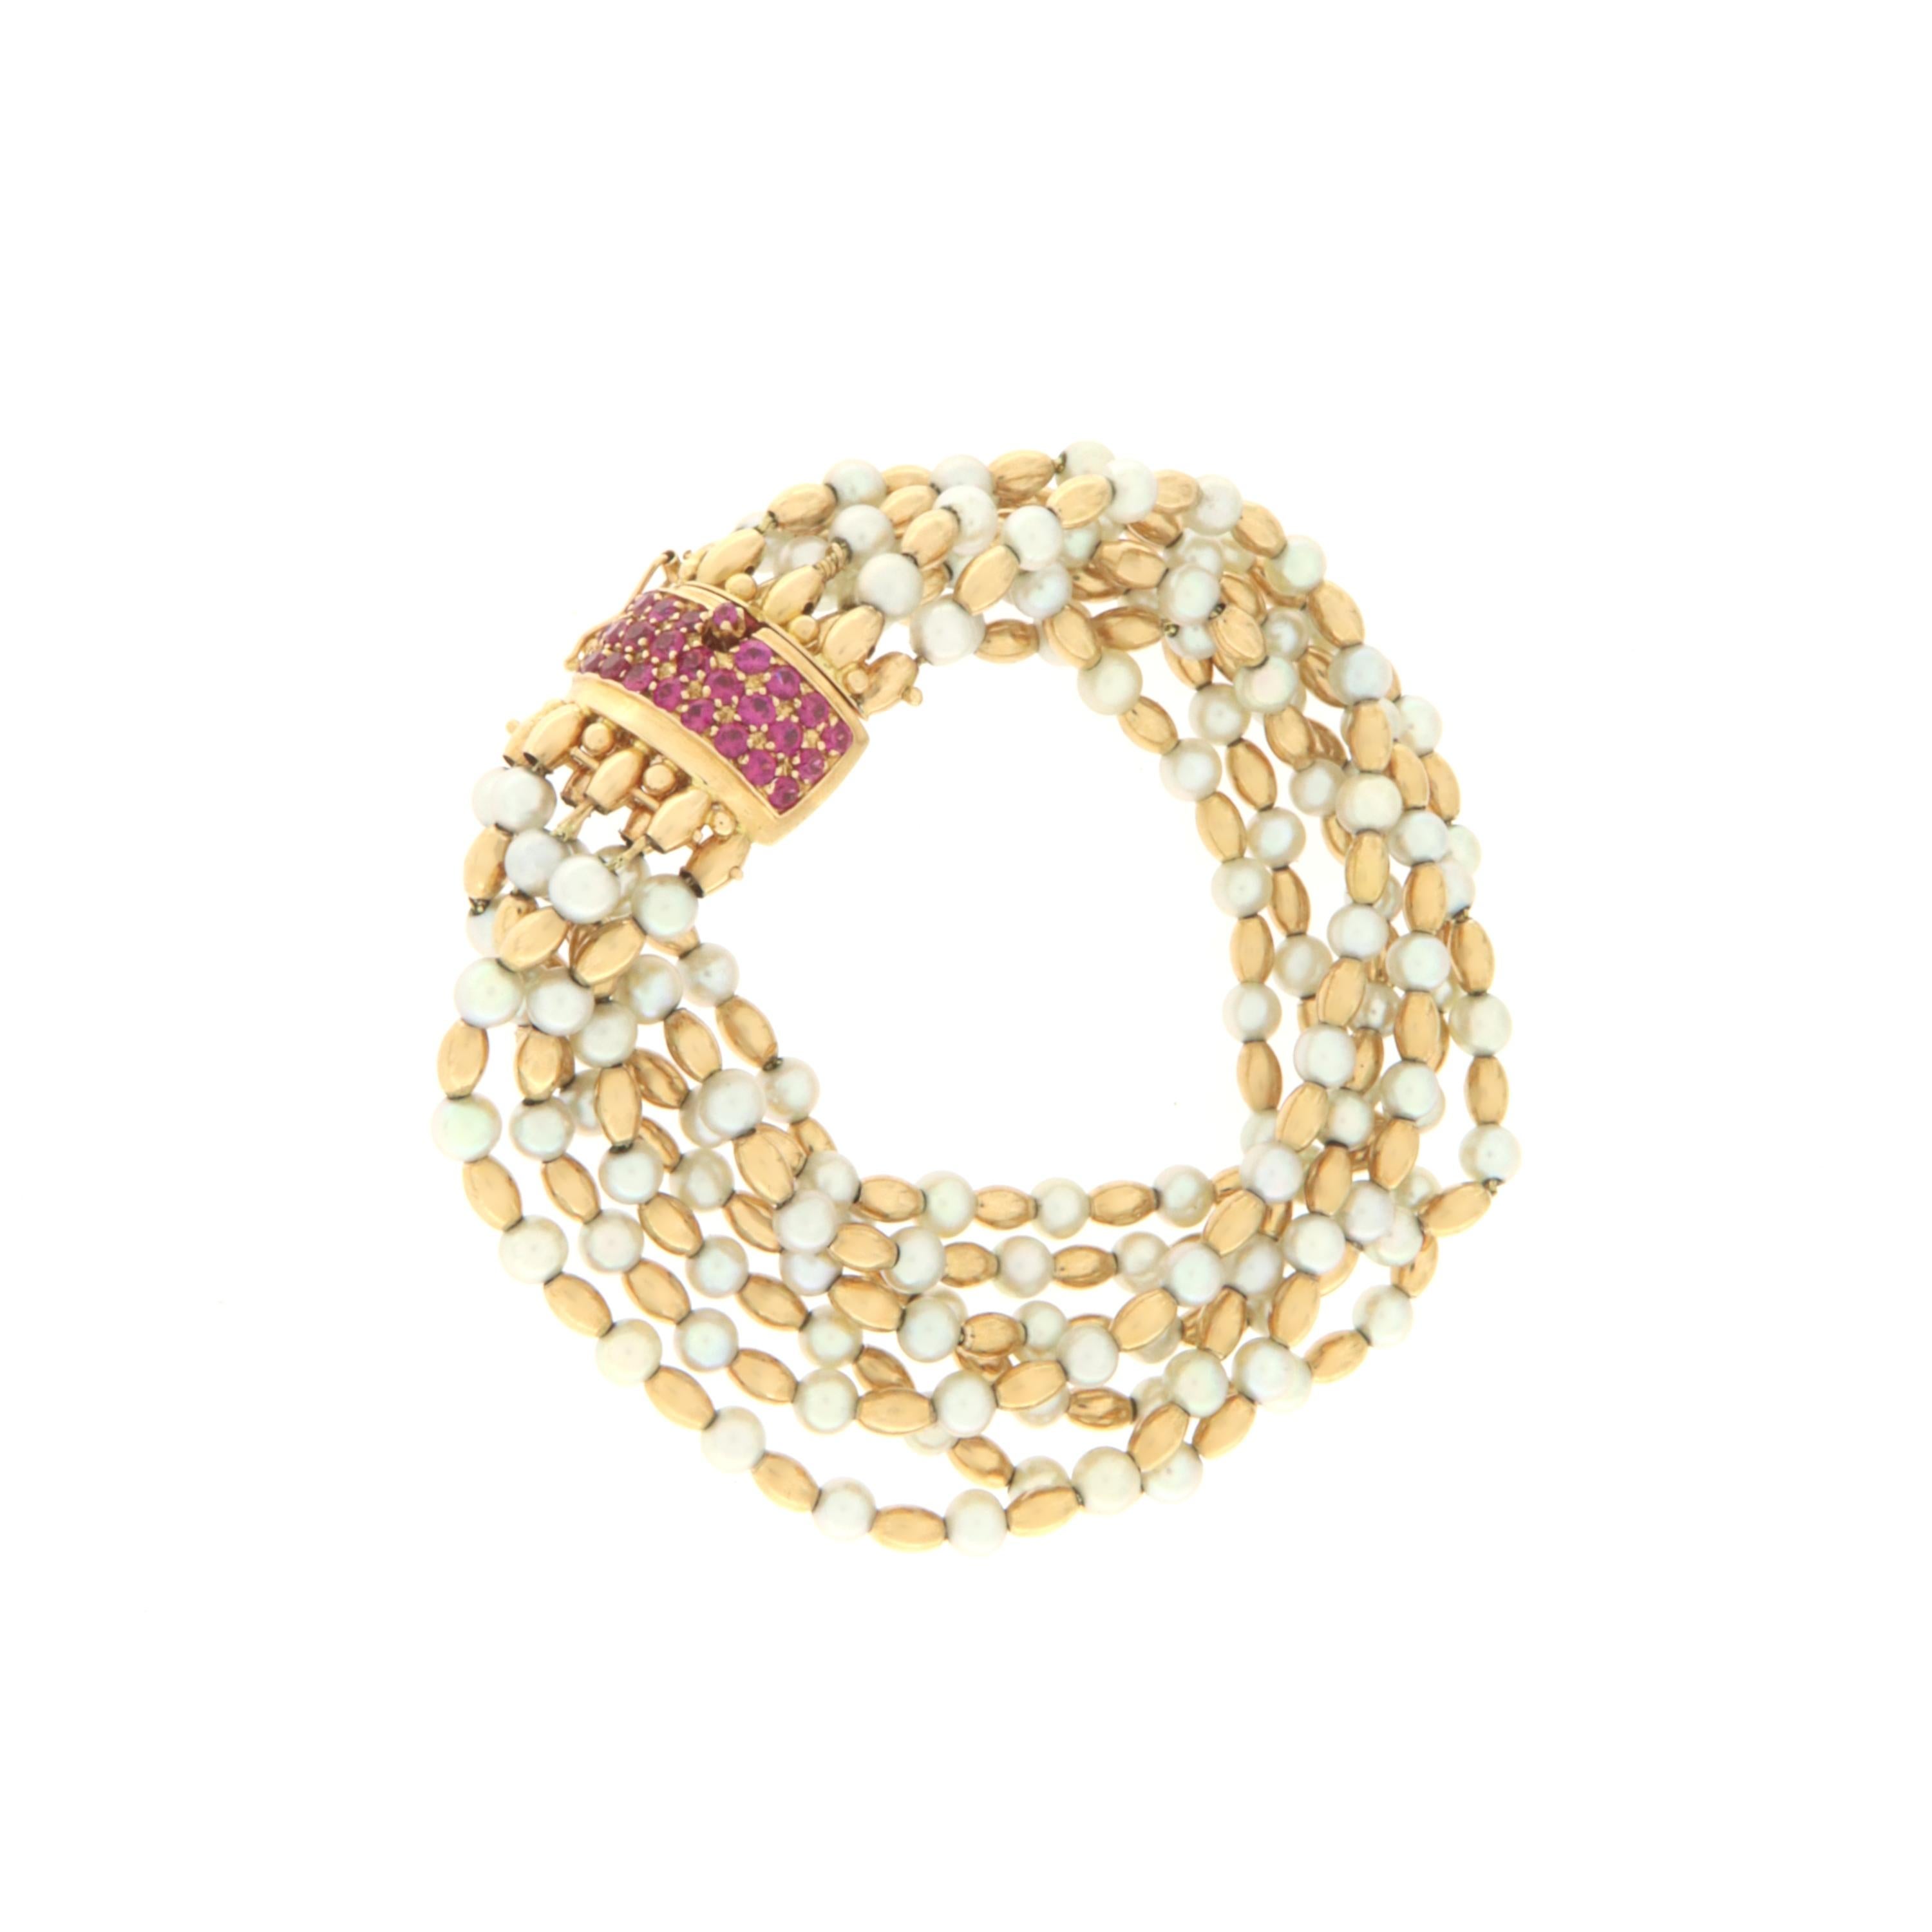 Beautiful 50s 18 karat yellow gold cuff bracelet mounted with cultured pearls and rubies
 
Bracelet total weight 49.50 grams
Rubies weight 1.30 karat
Bracelet length 17.50 cm